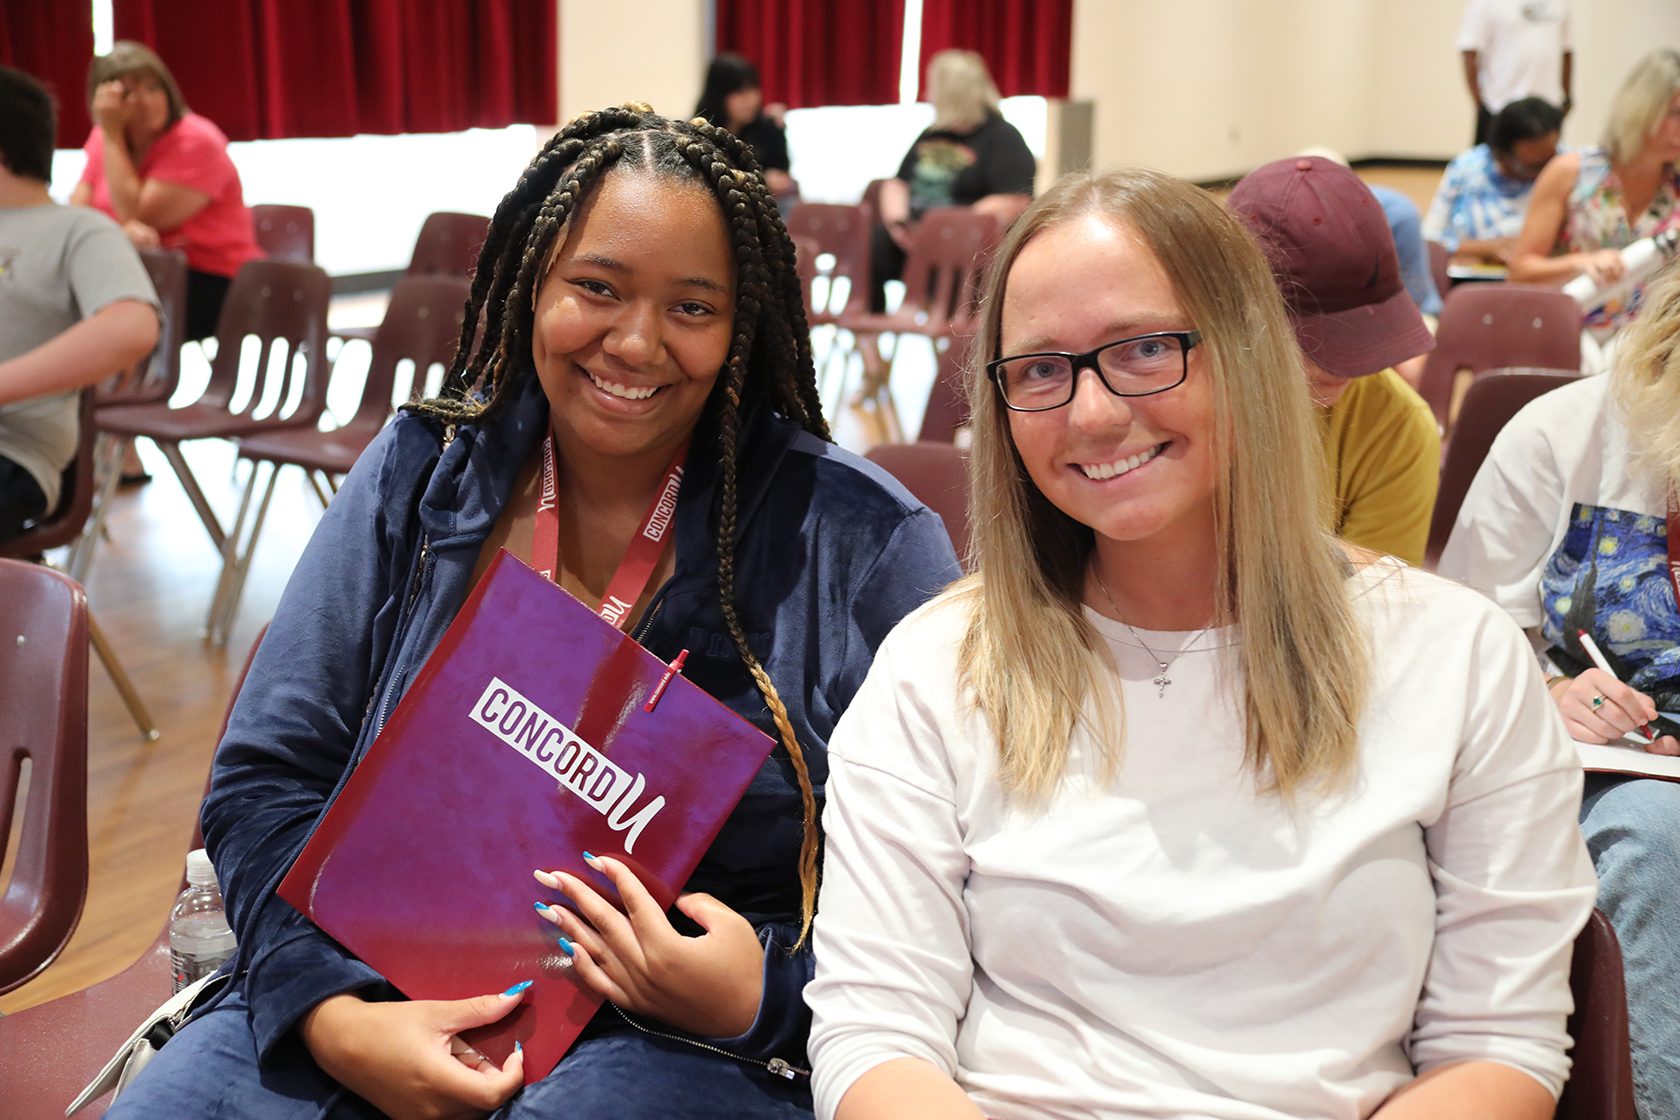 Attendees of one of Concord University's Orientation sessions